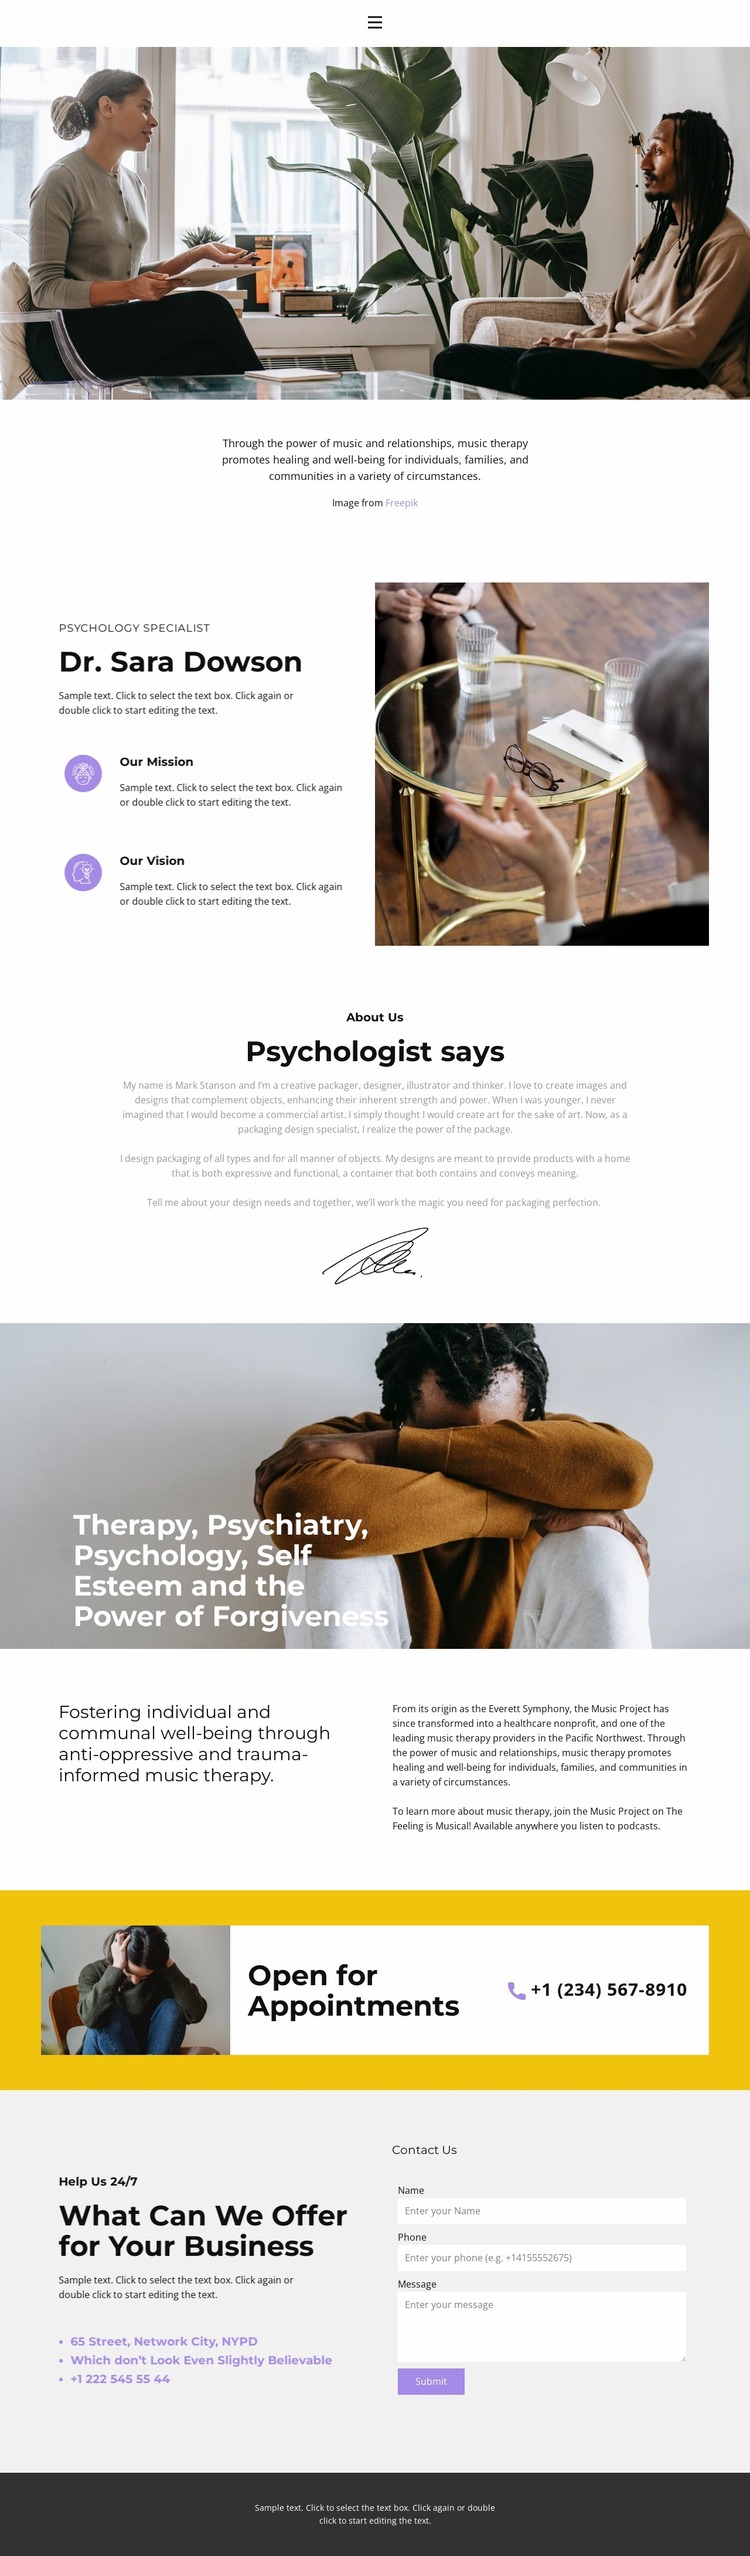 Qualified help from a psychologist Website Mockup